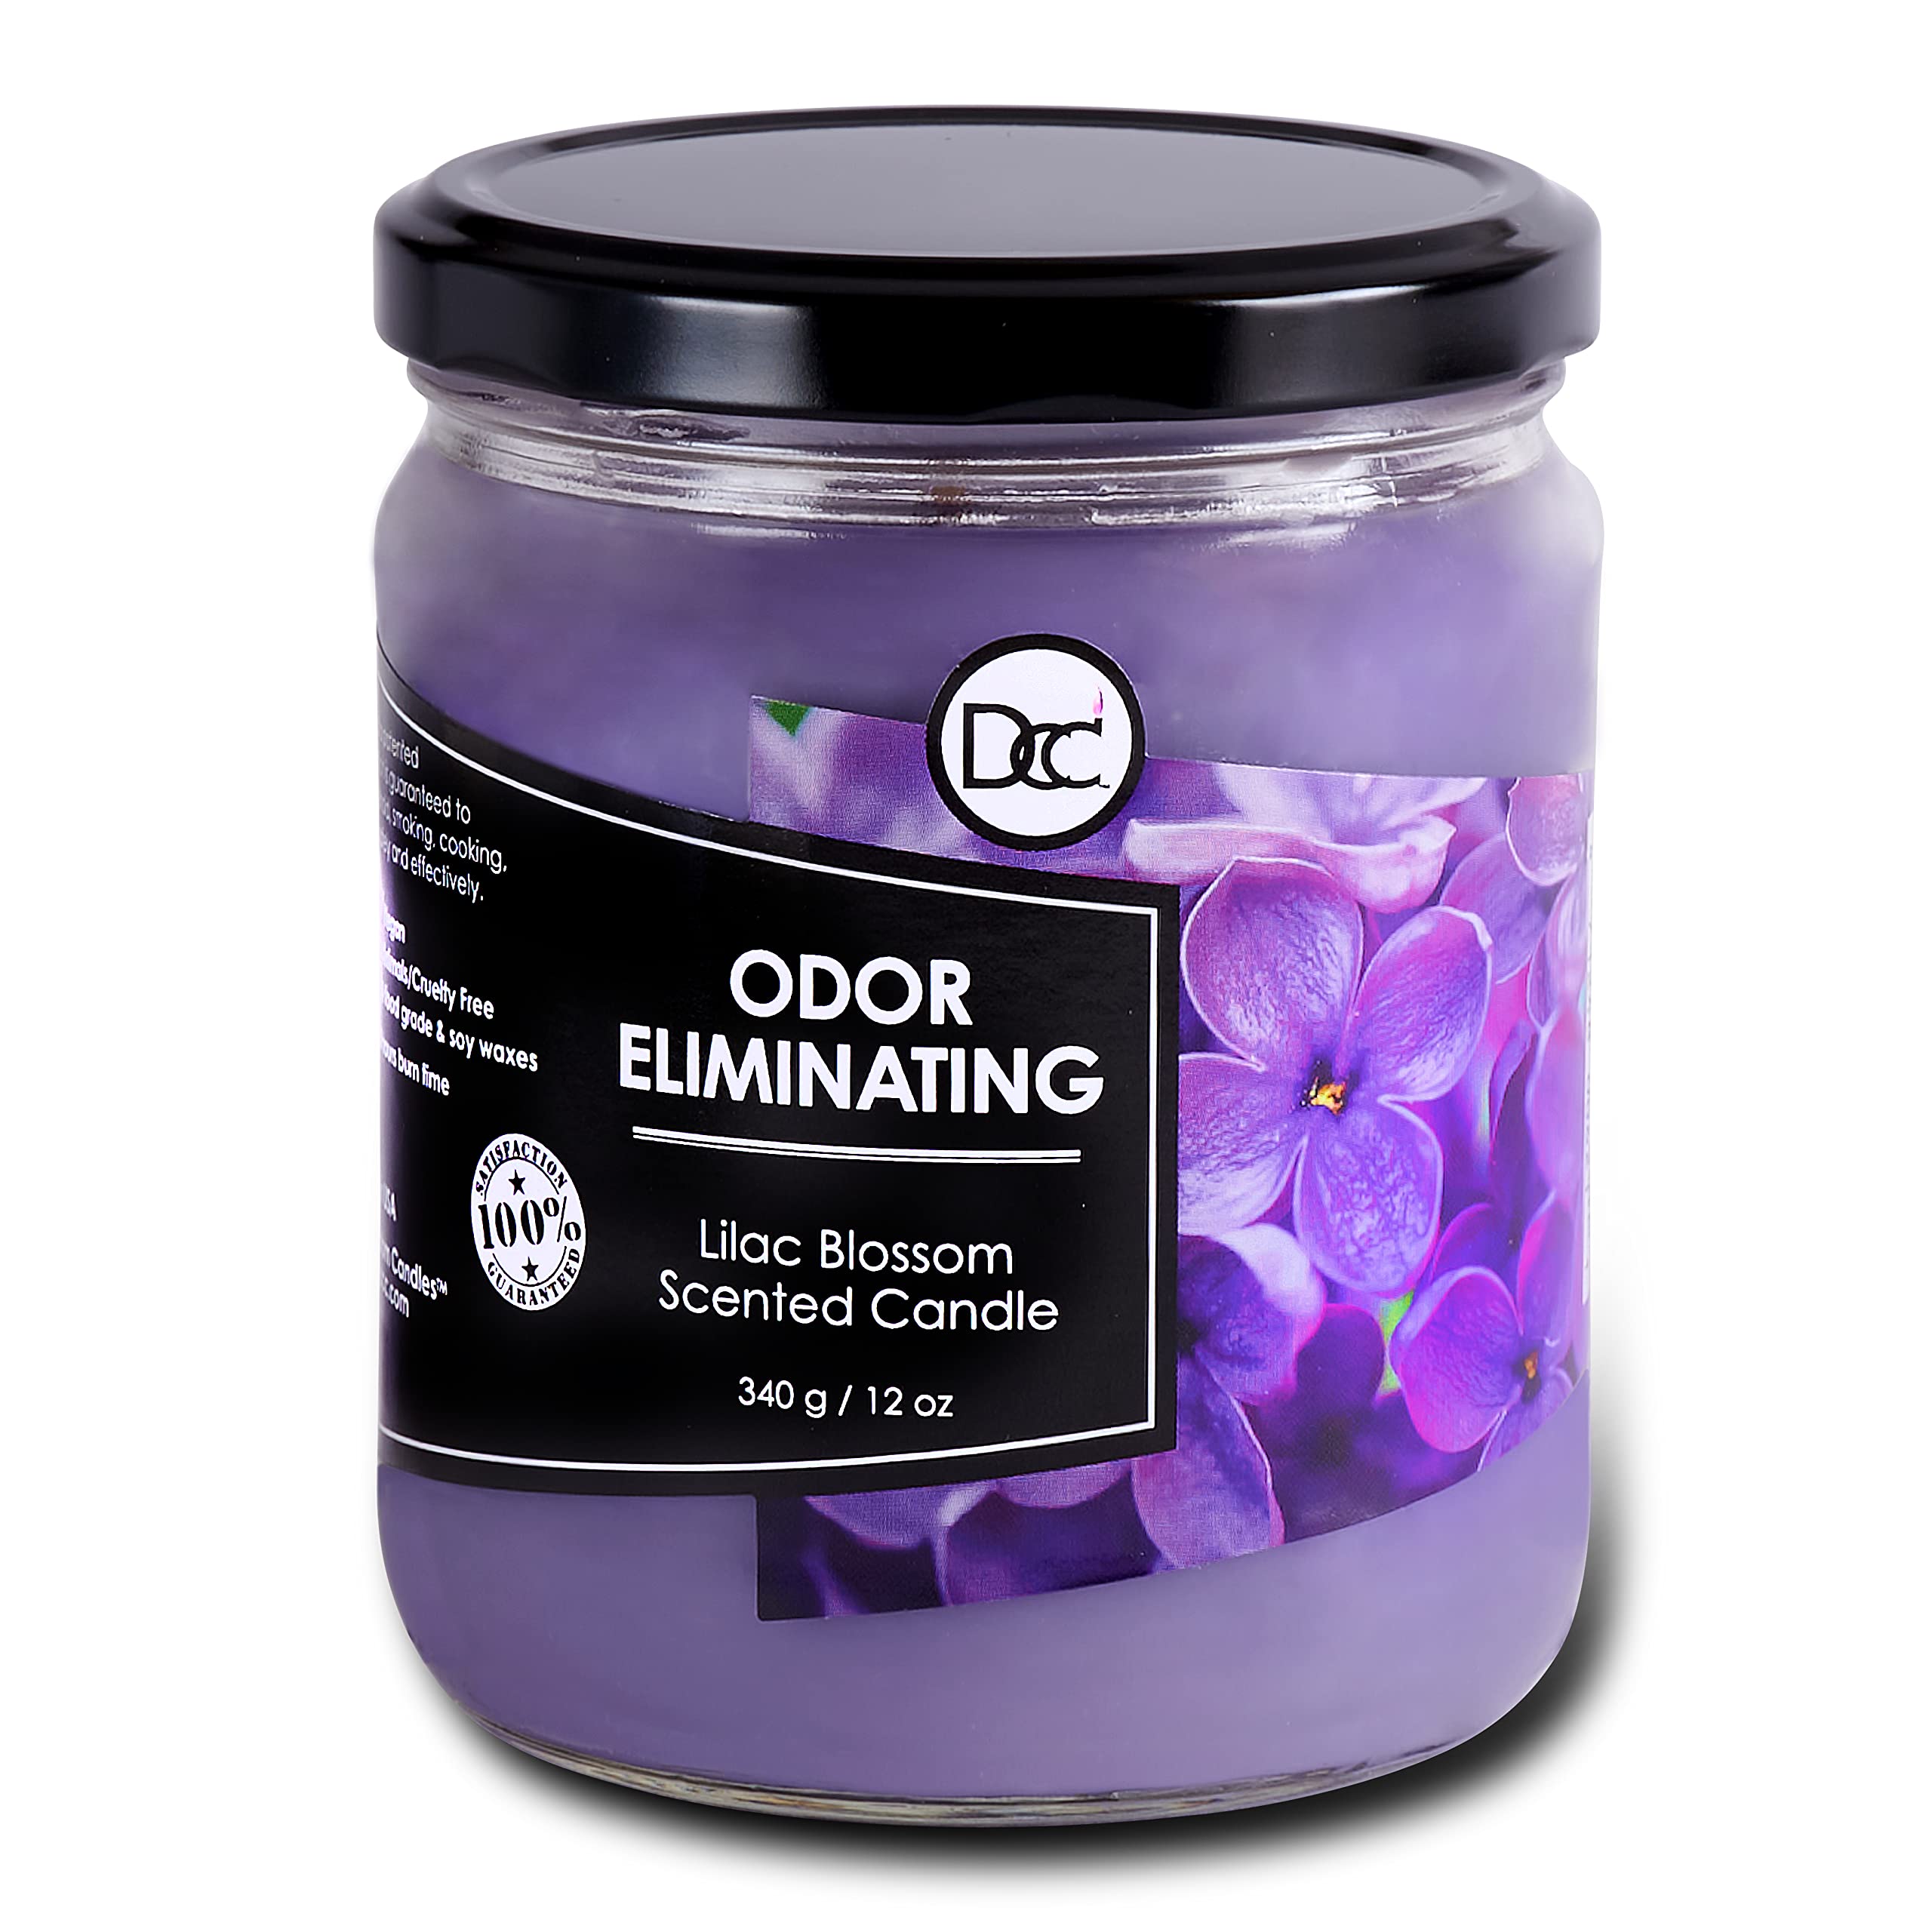 Lilac Blossom Odor Eliminating Highly Fragranced Candle